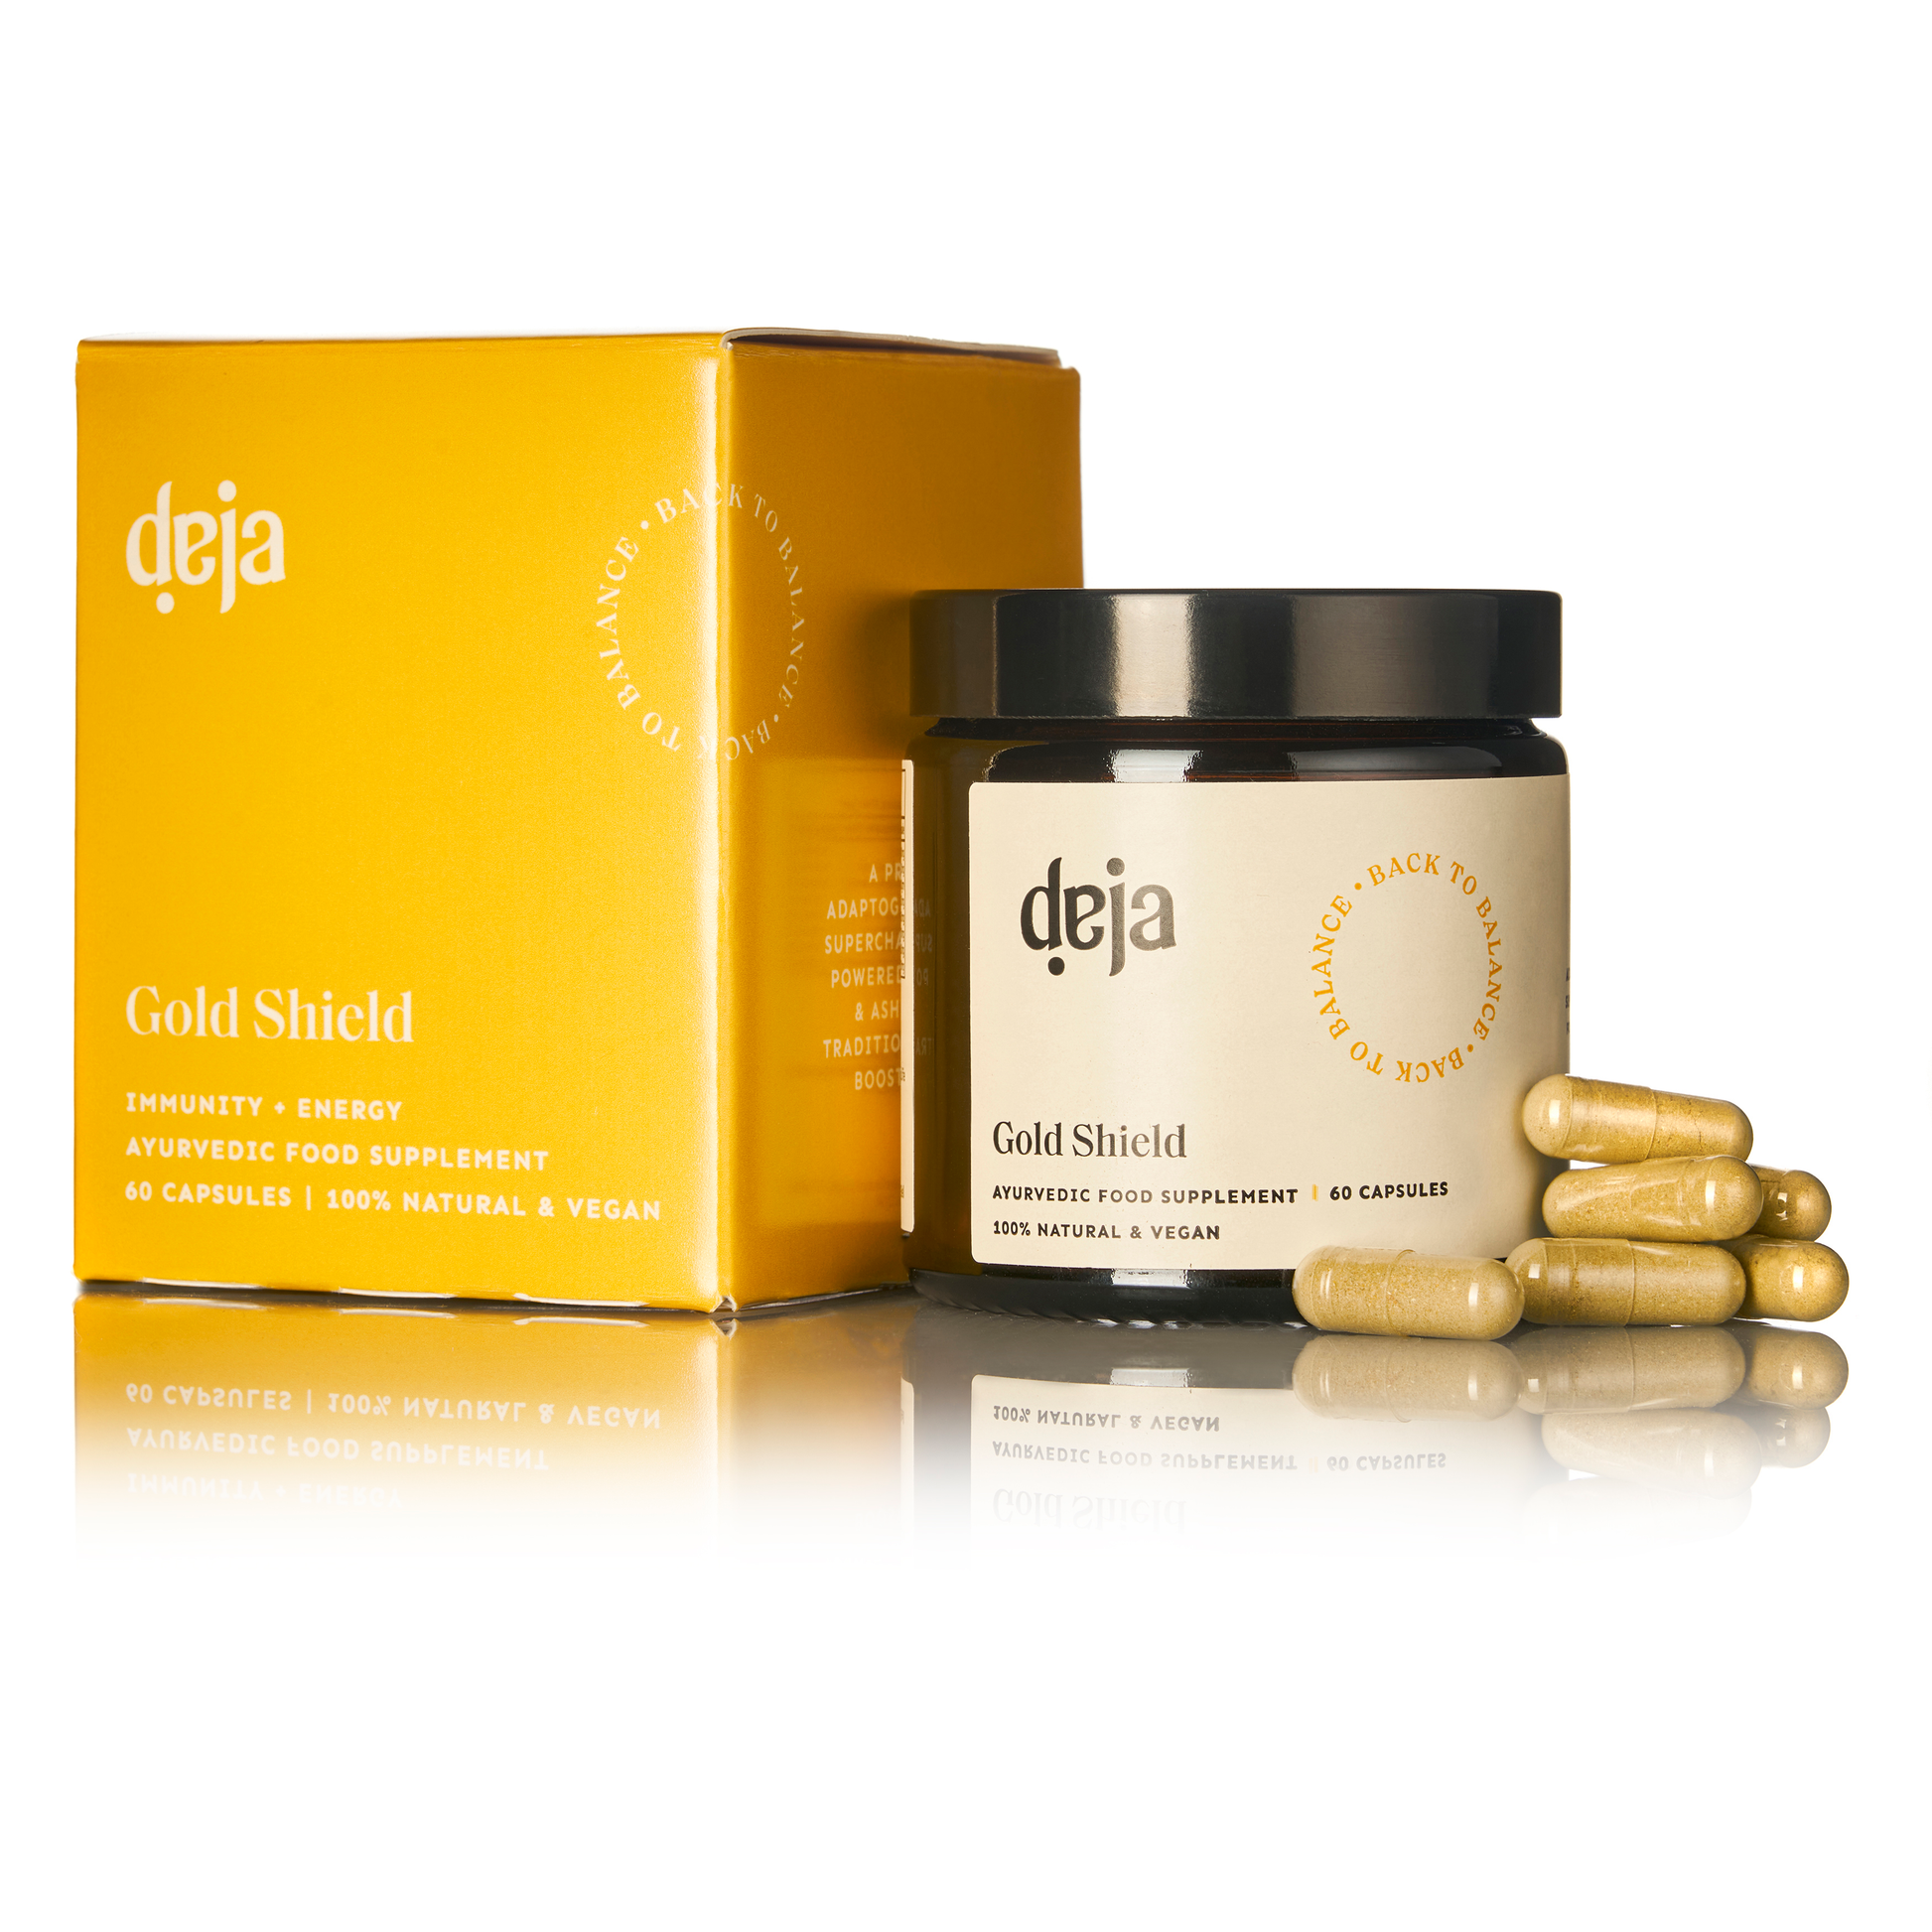 Deja Gold Shield Immunity capsules and packaging